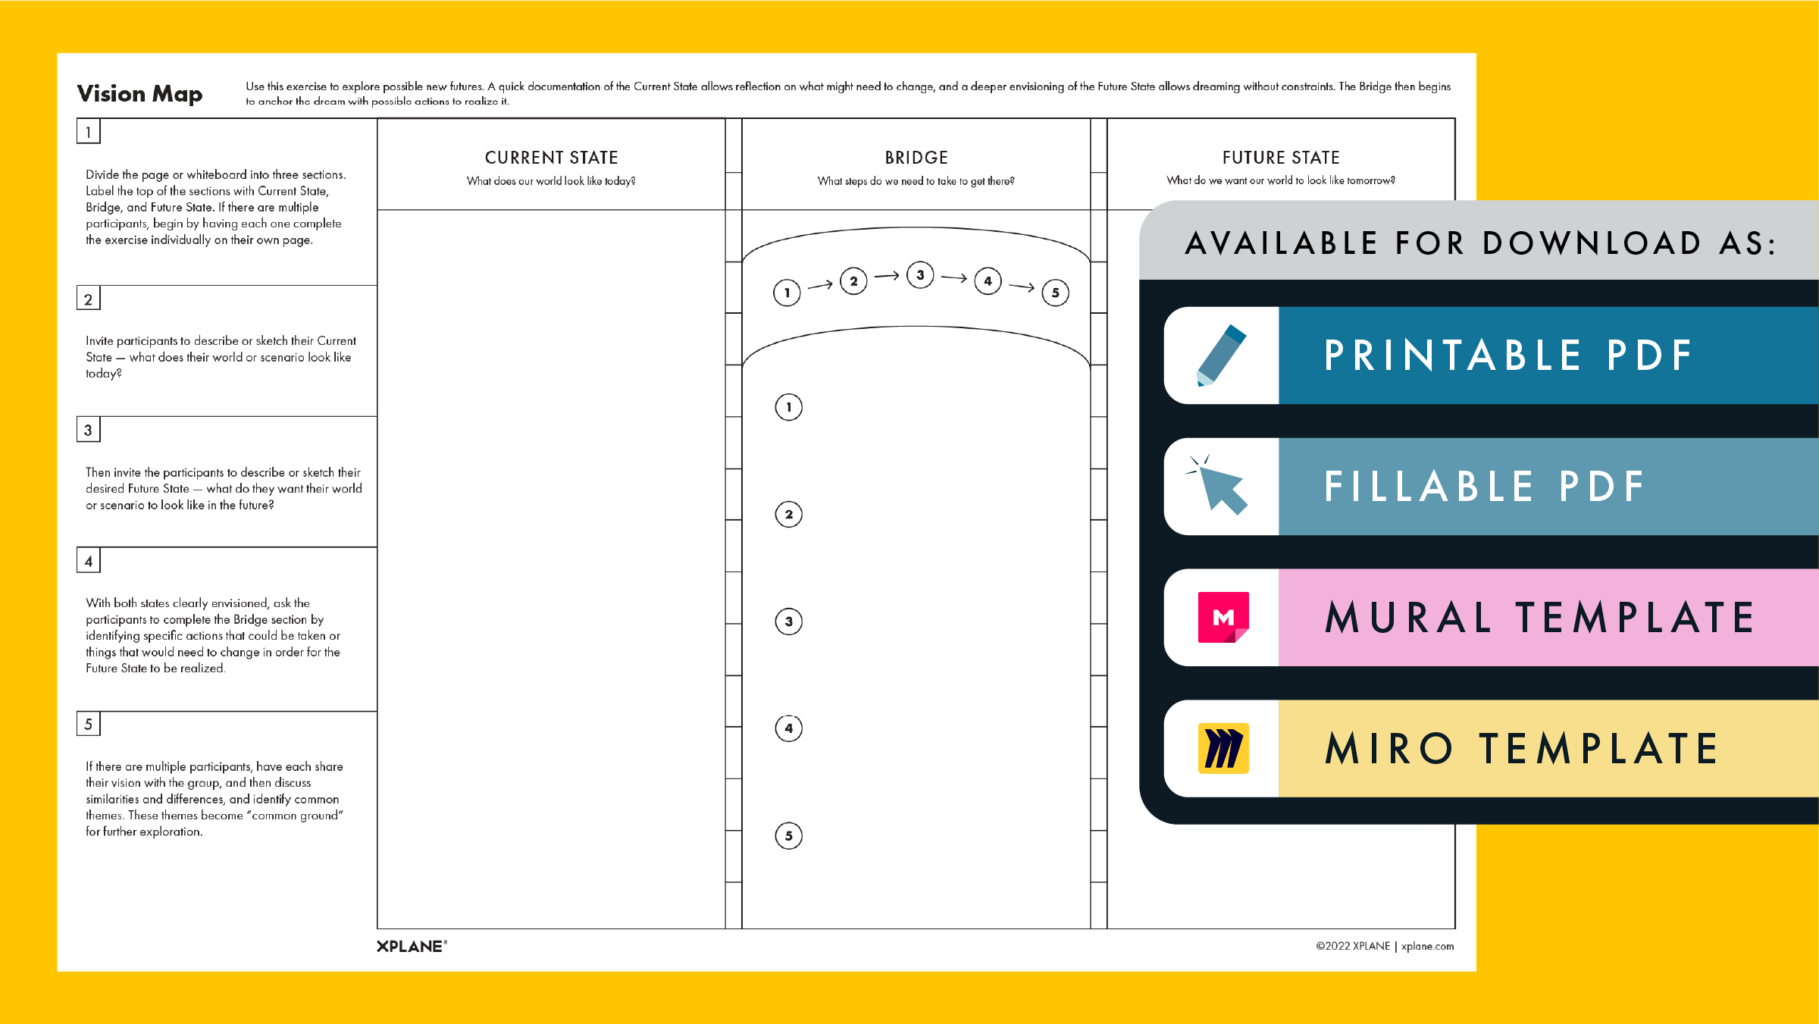 Vision Map worksheet against a yellow background. Four tabs under the header "AVAILABLE FOR DOWNLOAD AS" indicate available file types available.